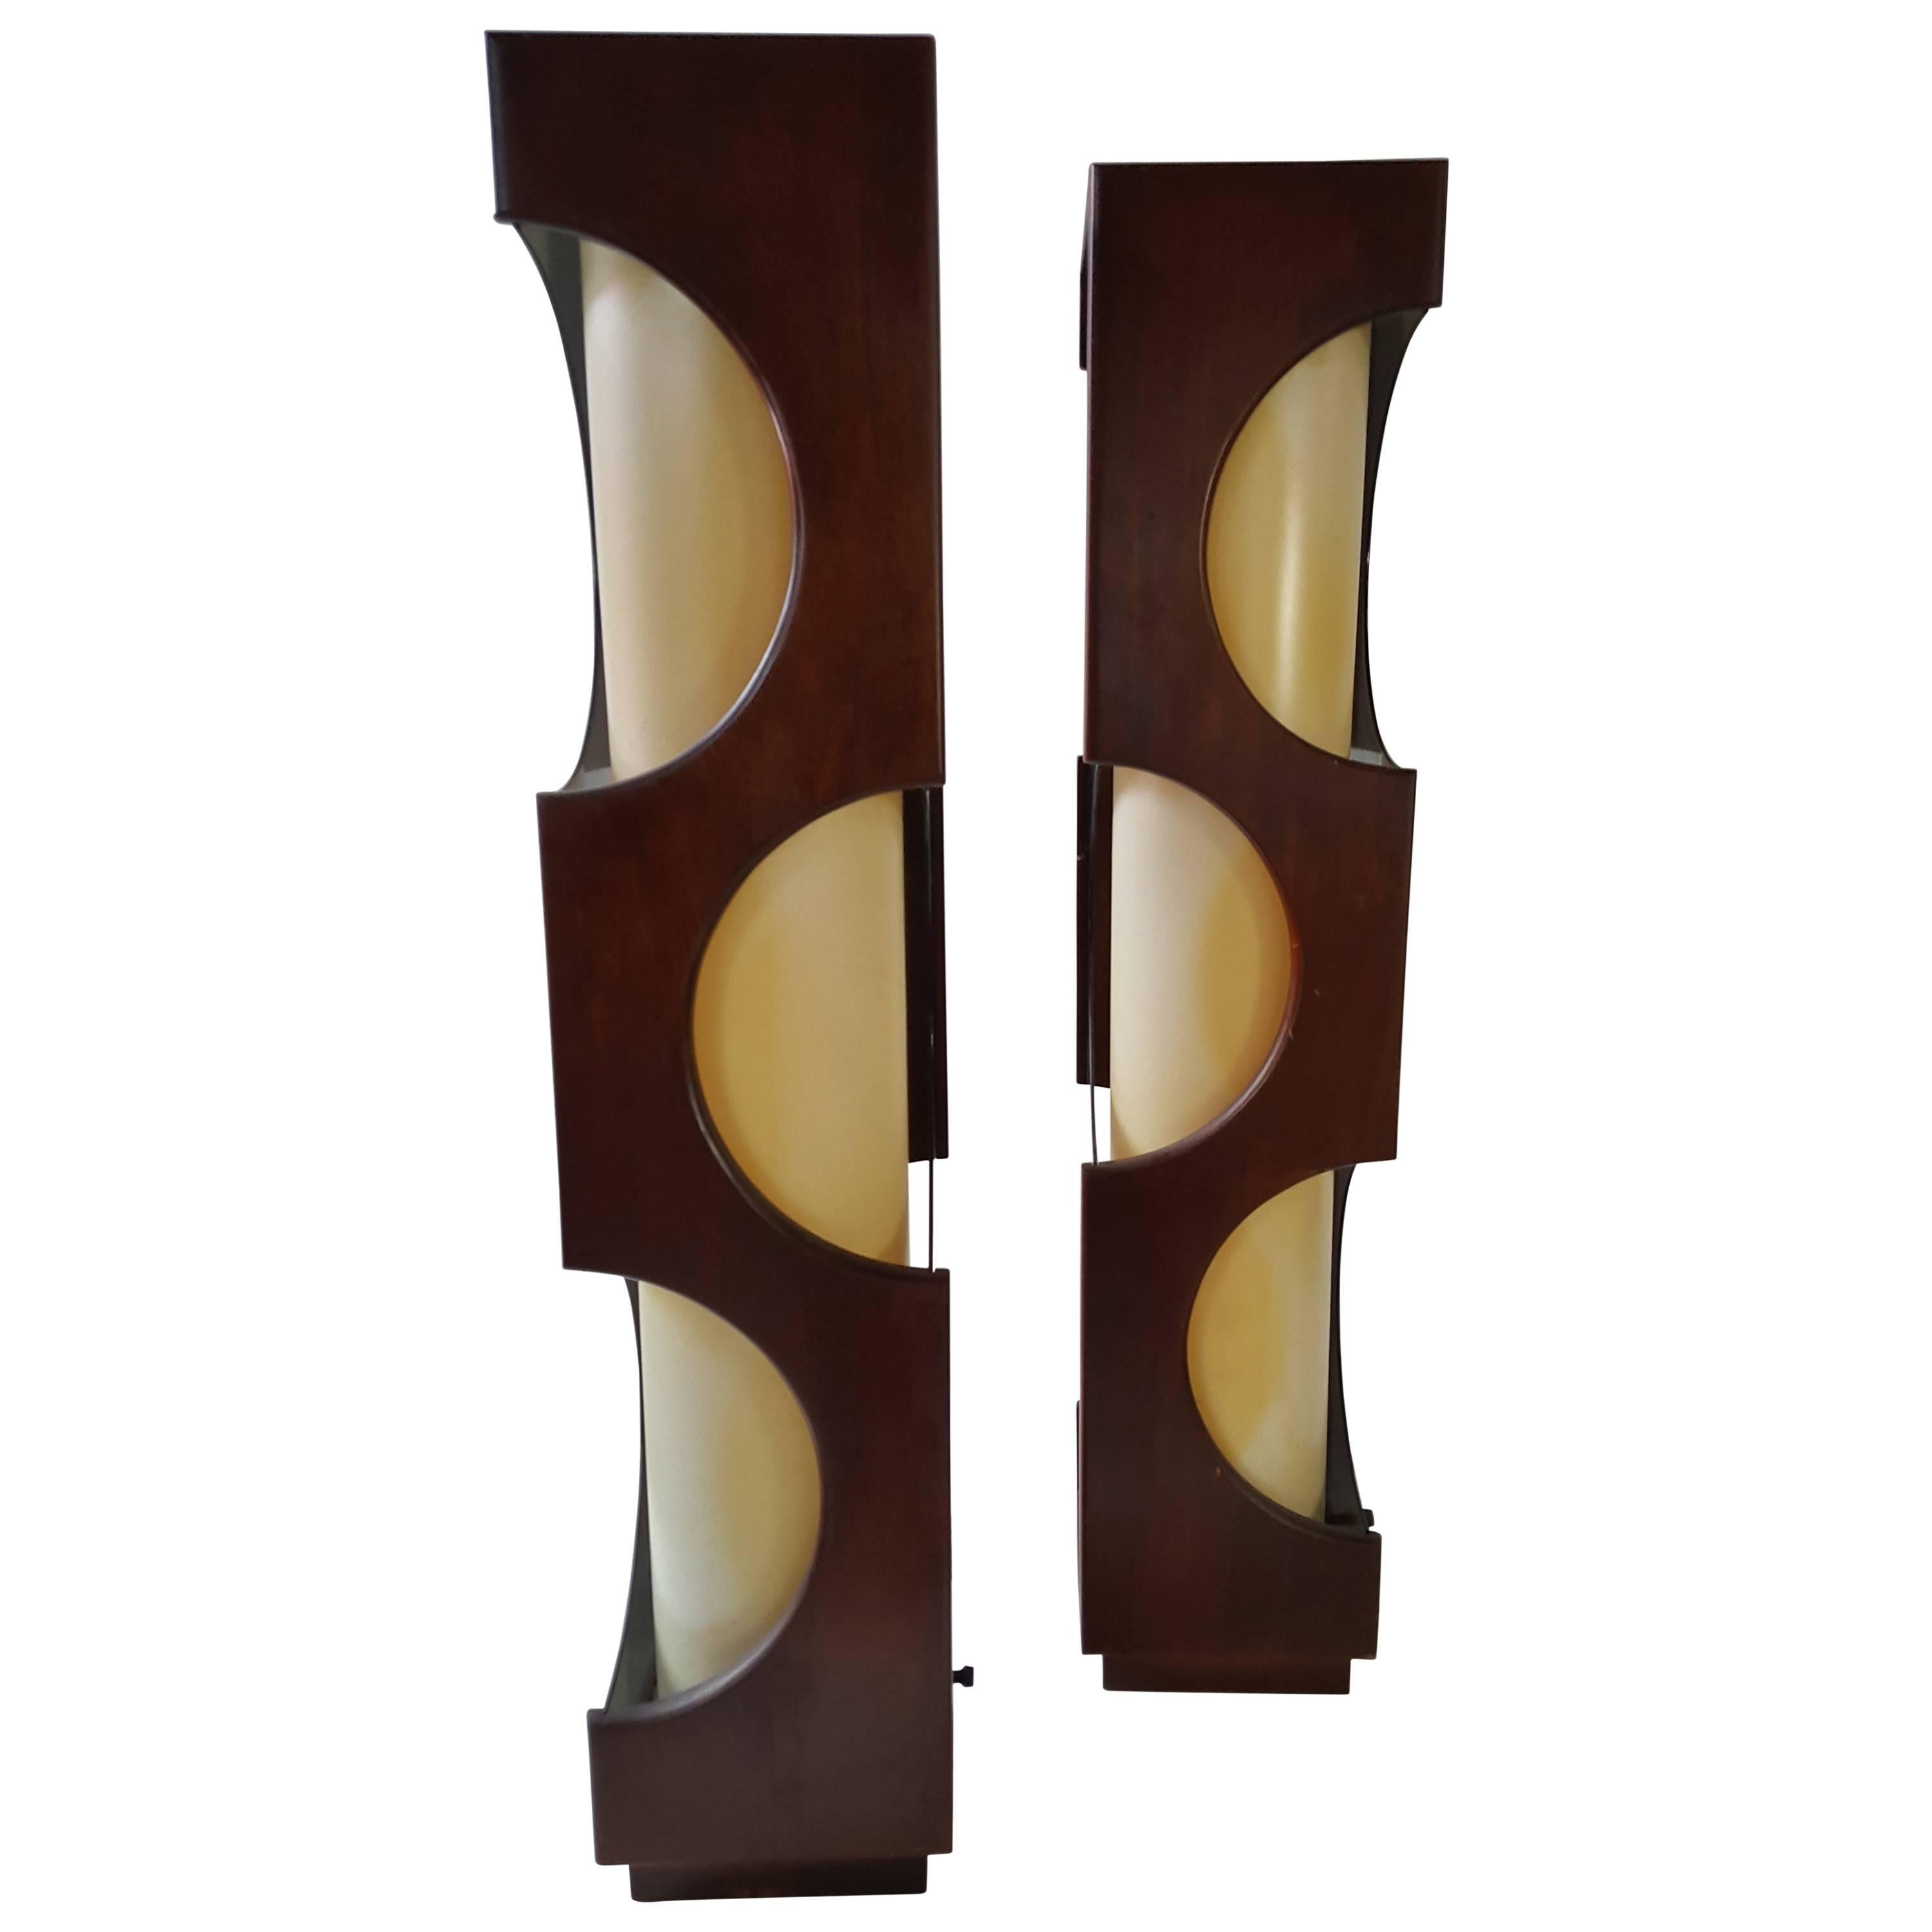 Pop Modernist Sculptural Walnut and Acrylic Table Lamps by Modeline